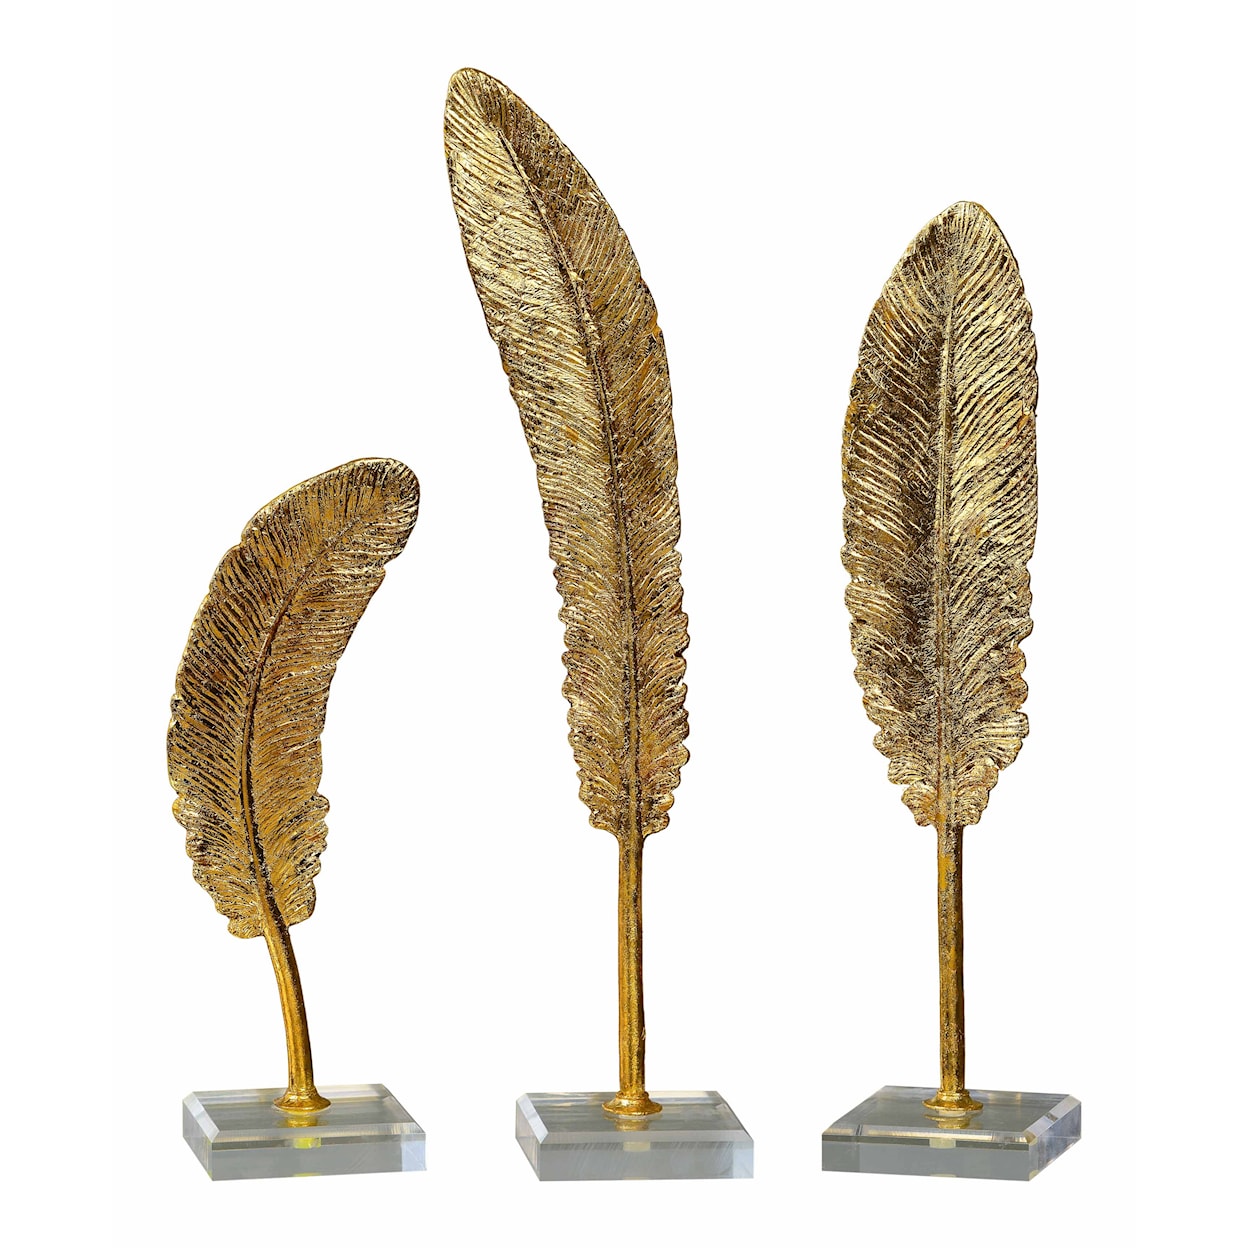 Uttermost Accessories - Statues and Figurines Feathers Gold Sculpture S/3